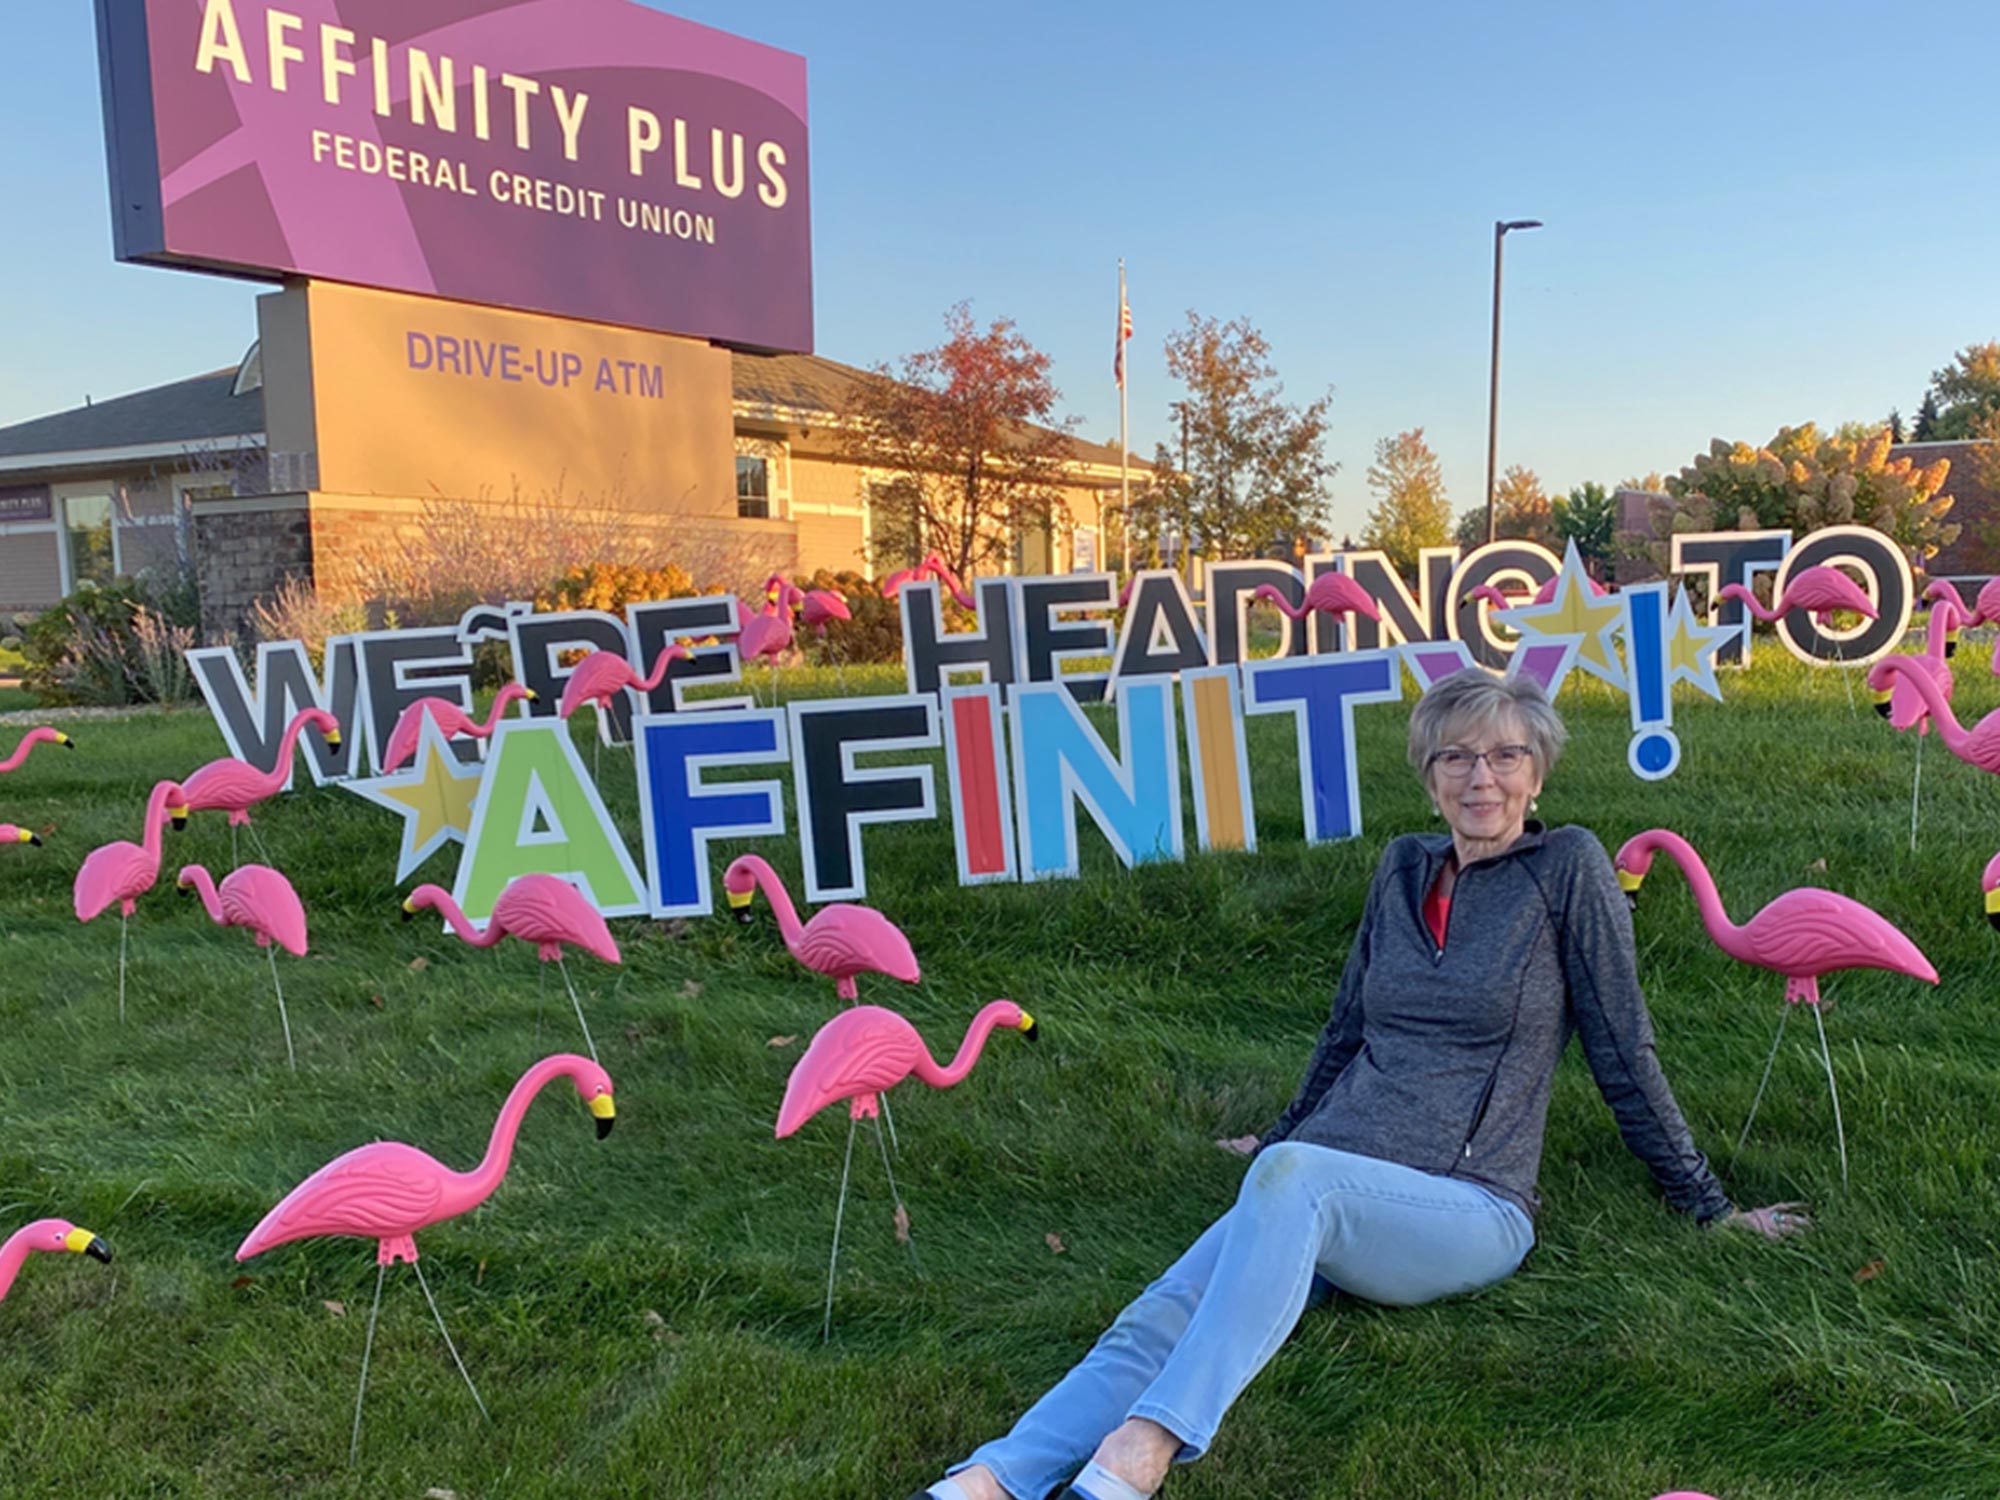 Woman sitting on the lawn in front of Affinity Plus branch with pink flamingos